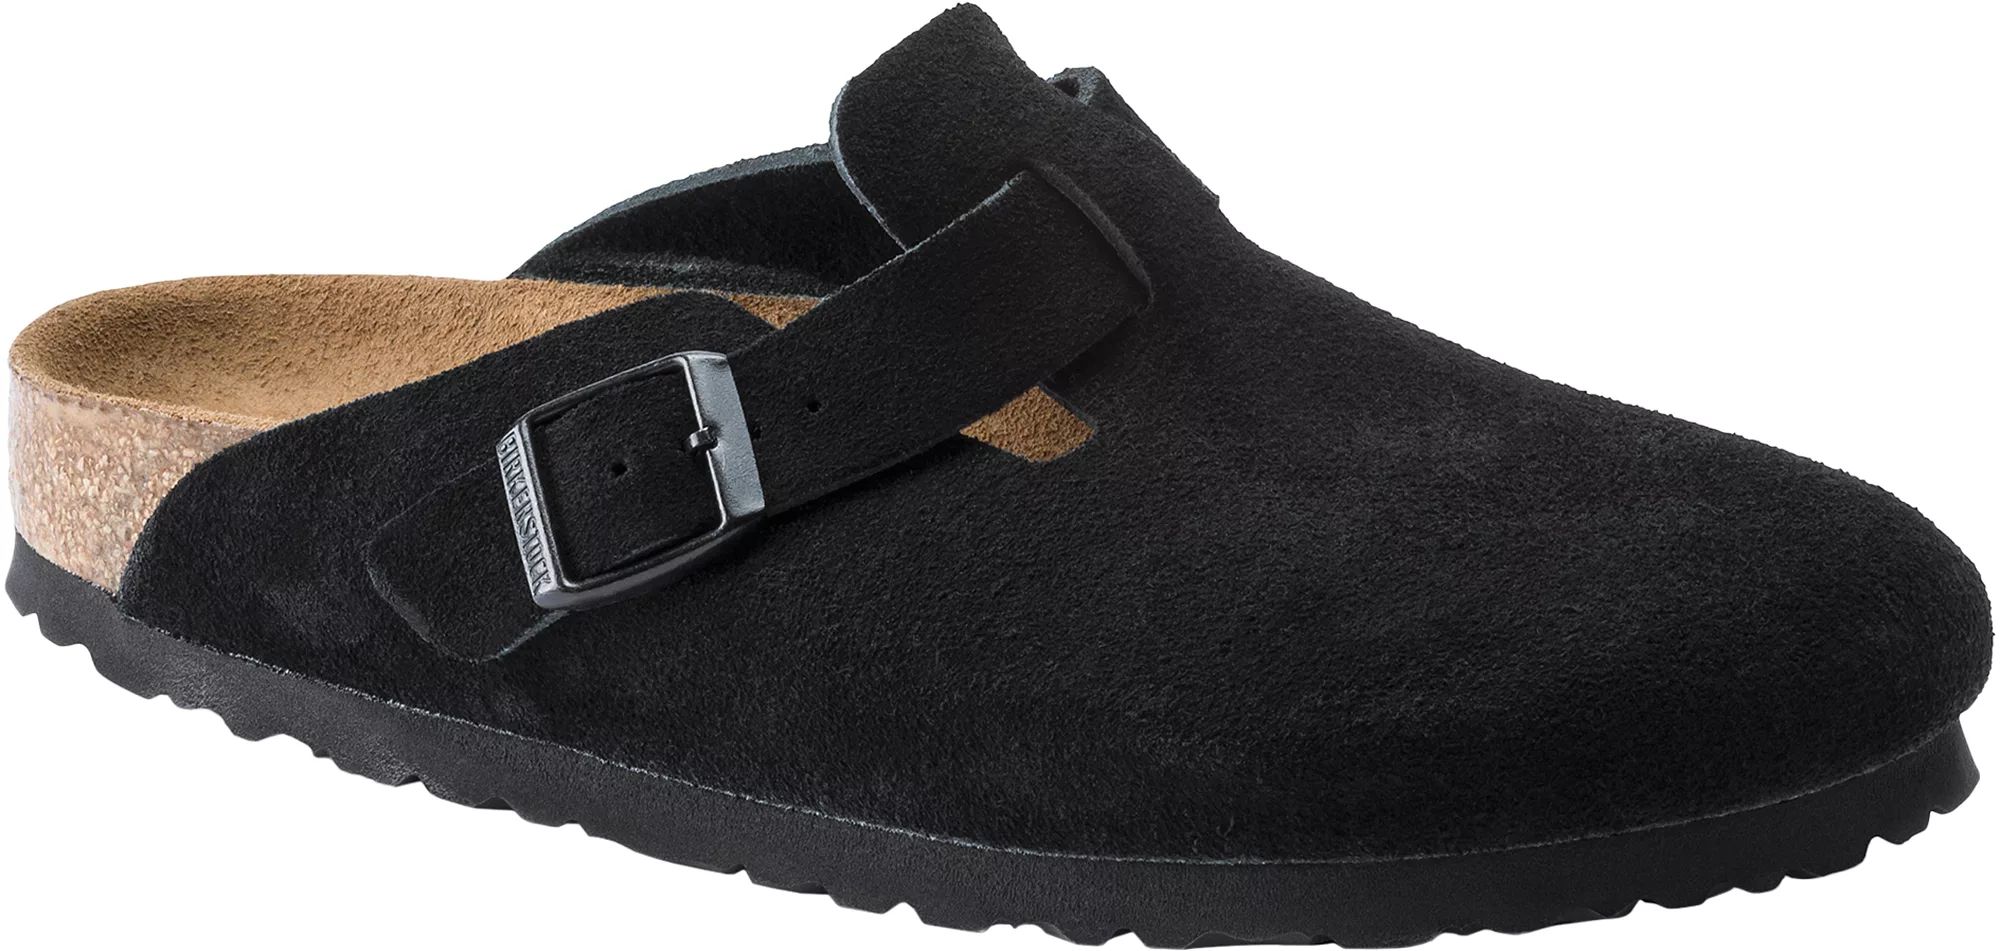 Birkenstock Men's Boston Soft Footbed Casual Shoes, Size 43, Black - Father's Day Gift | Public Lands